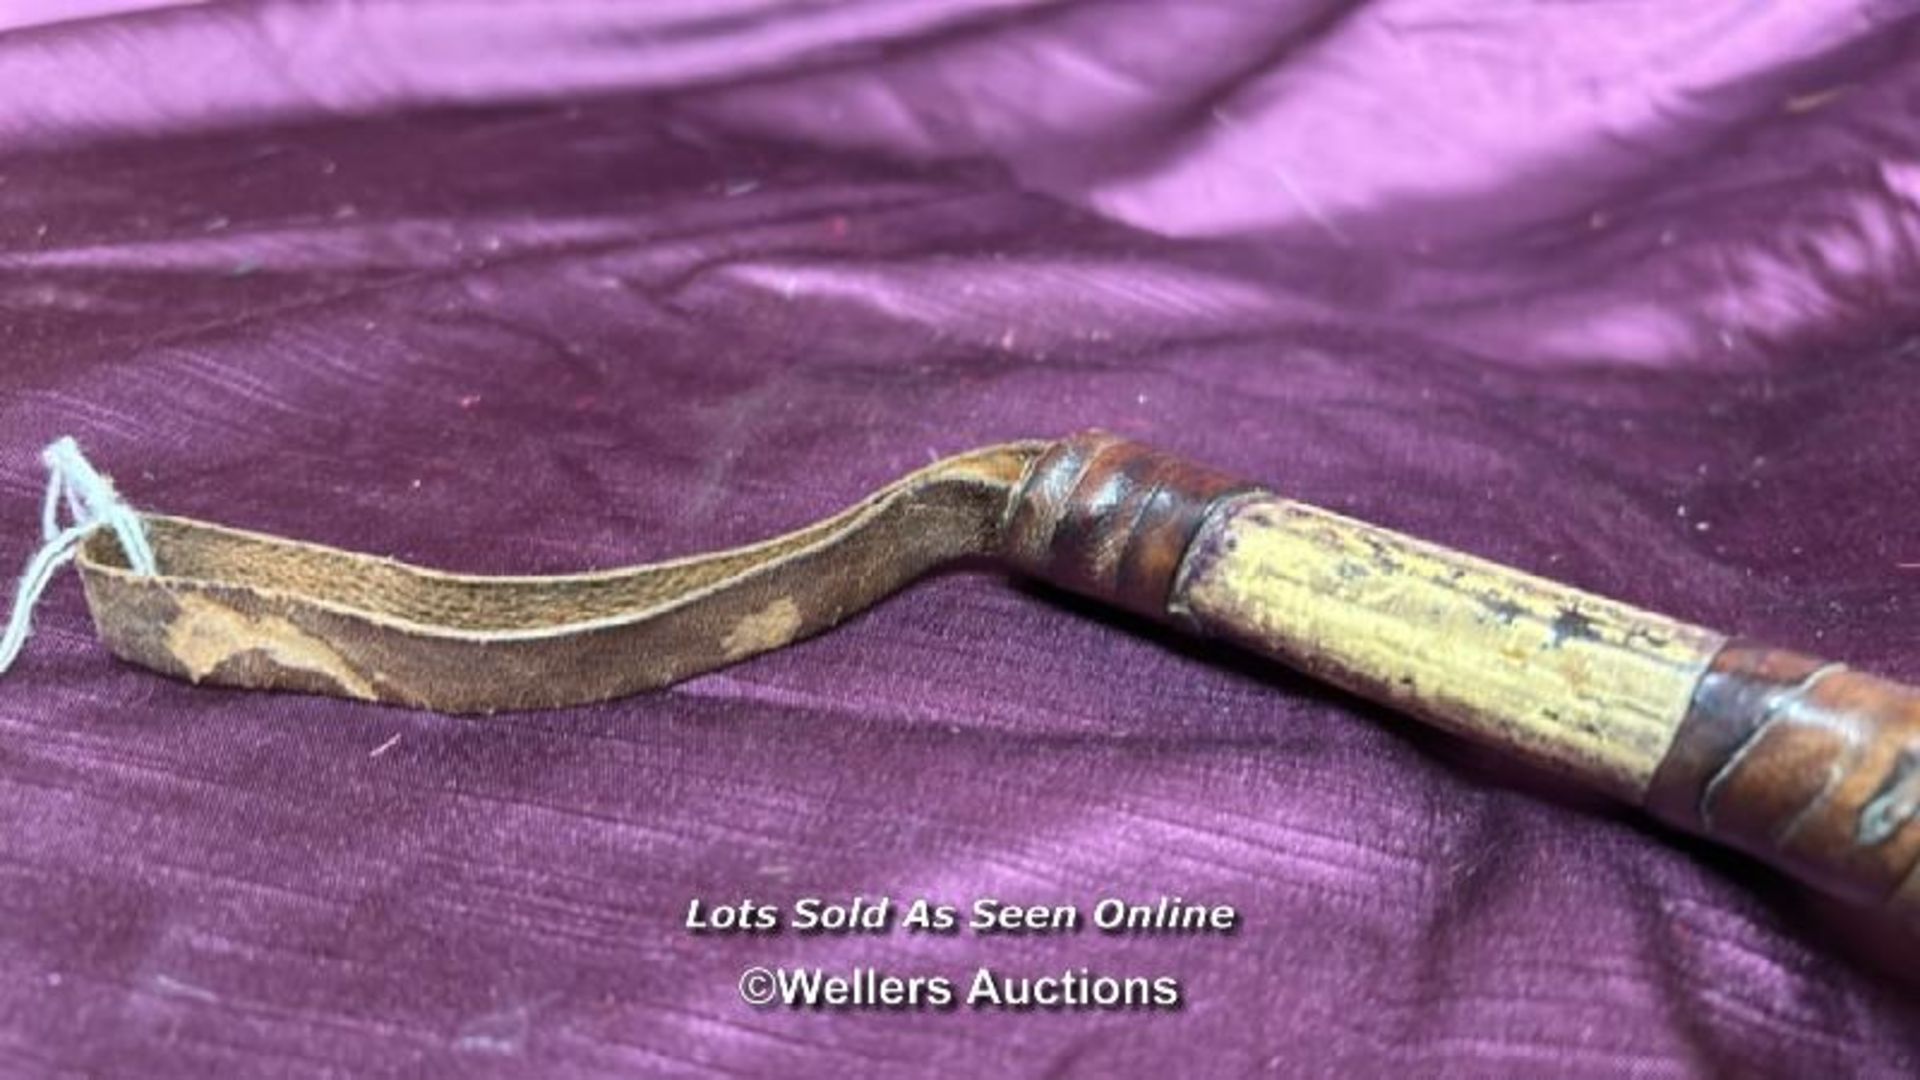 19TH CENTURY CLUB WITH LEATHER WRIST STRAP - Image 3 of 3